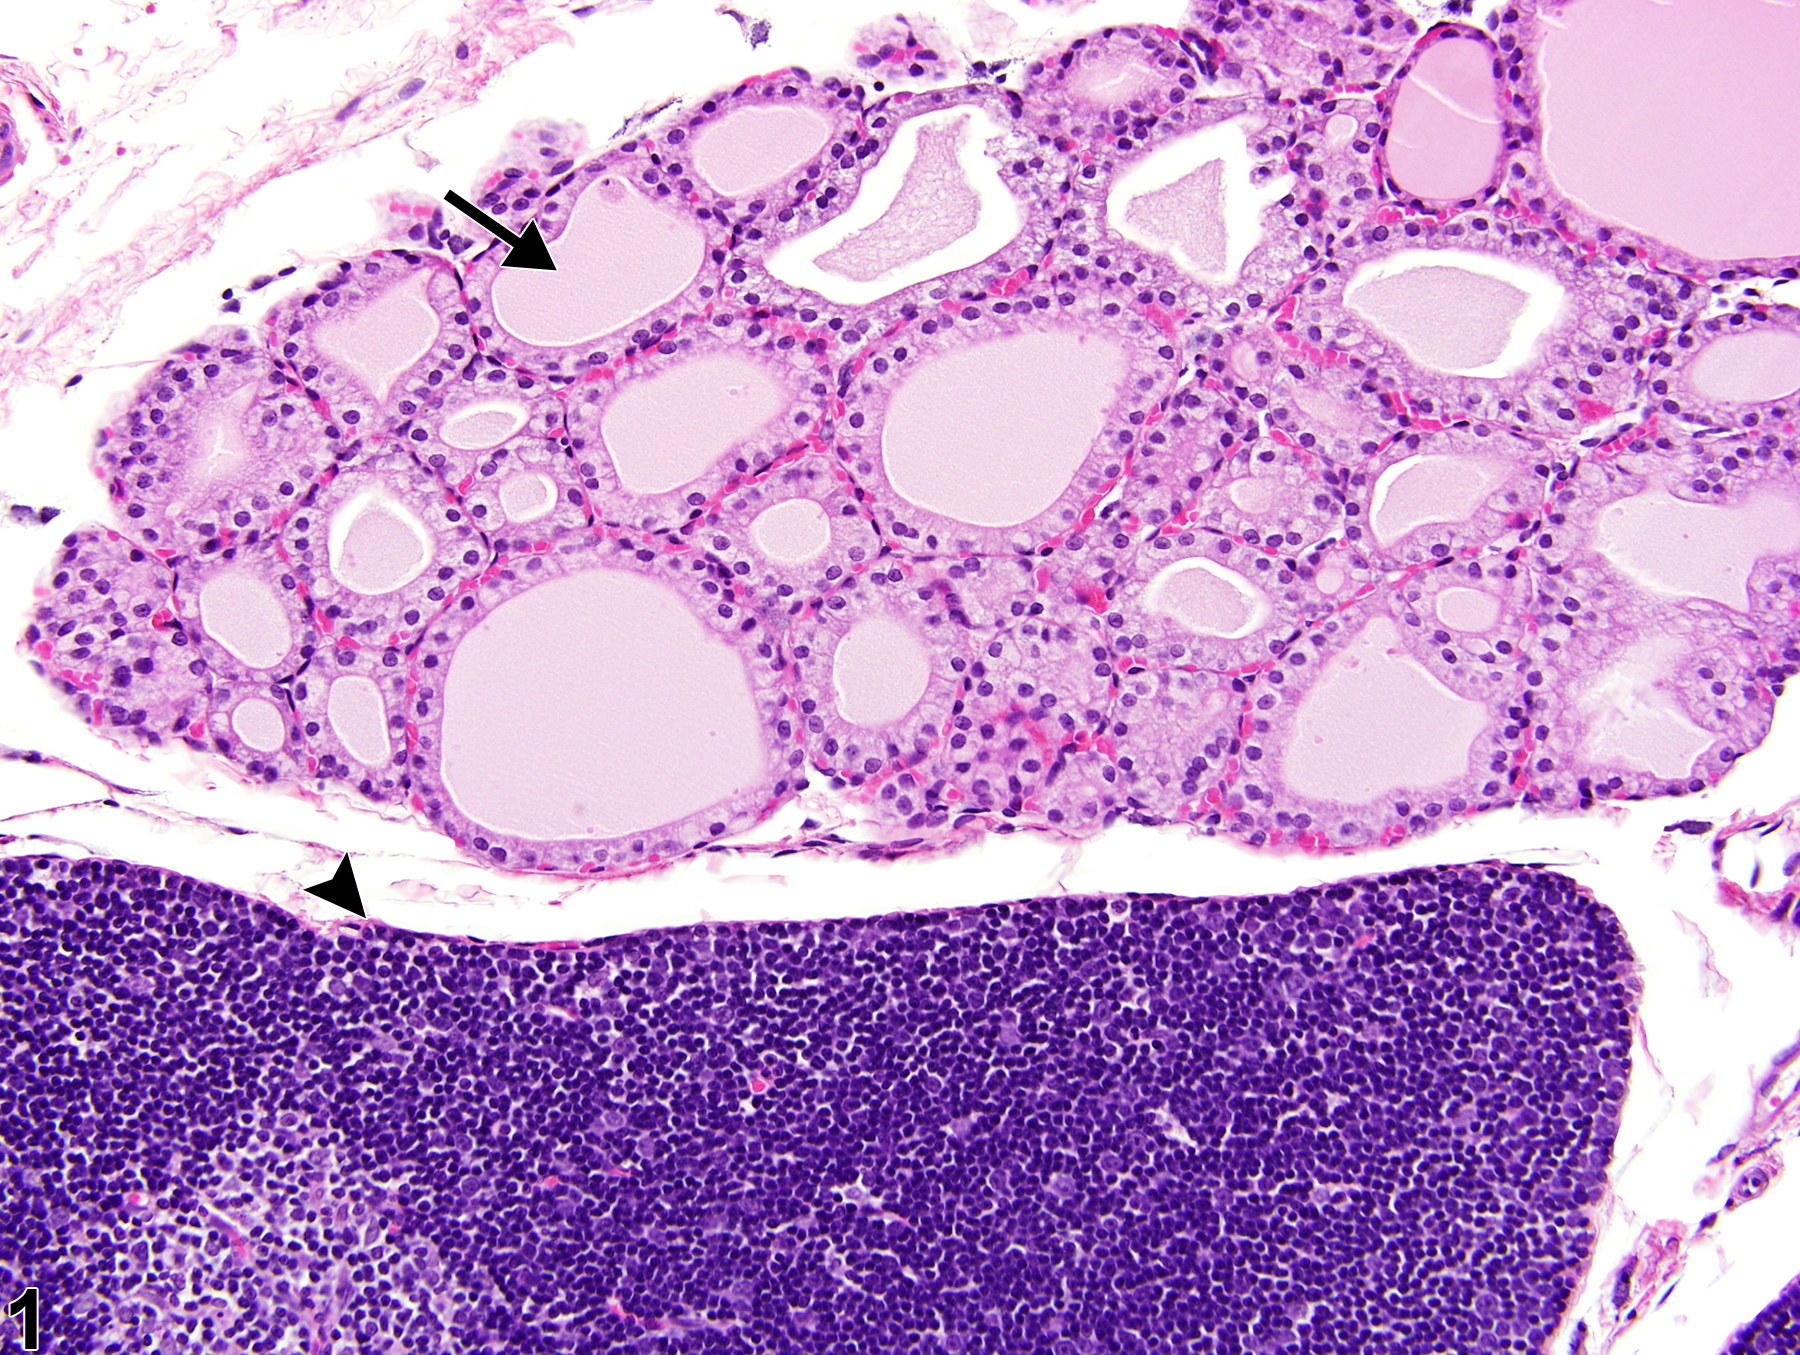 Image of ectopic tissue in the thymus from a male Harlan Sprague-Dawley rat in a subchronic study